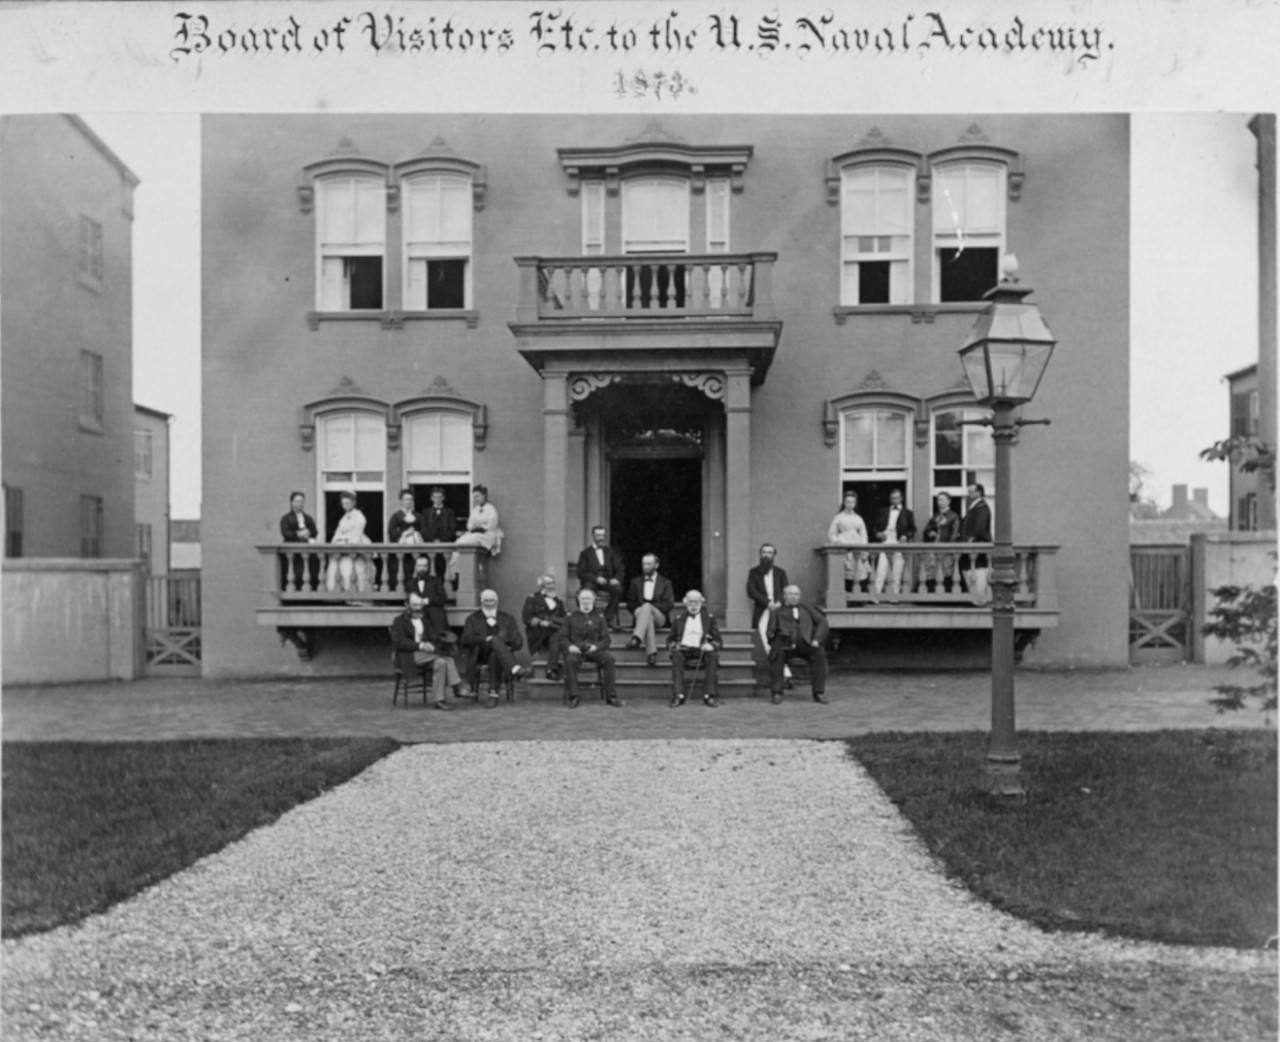 Board of Visitors to the U.S. Naval Academy, 1873